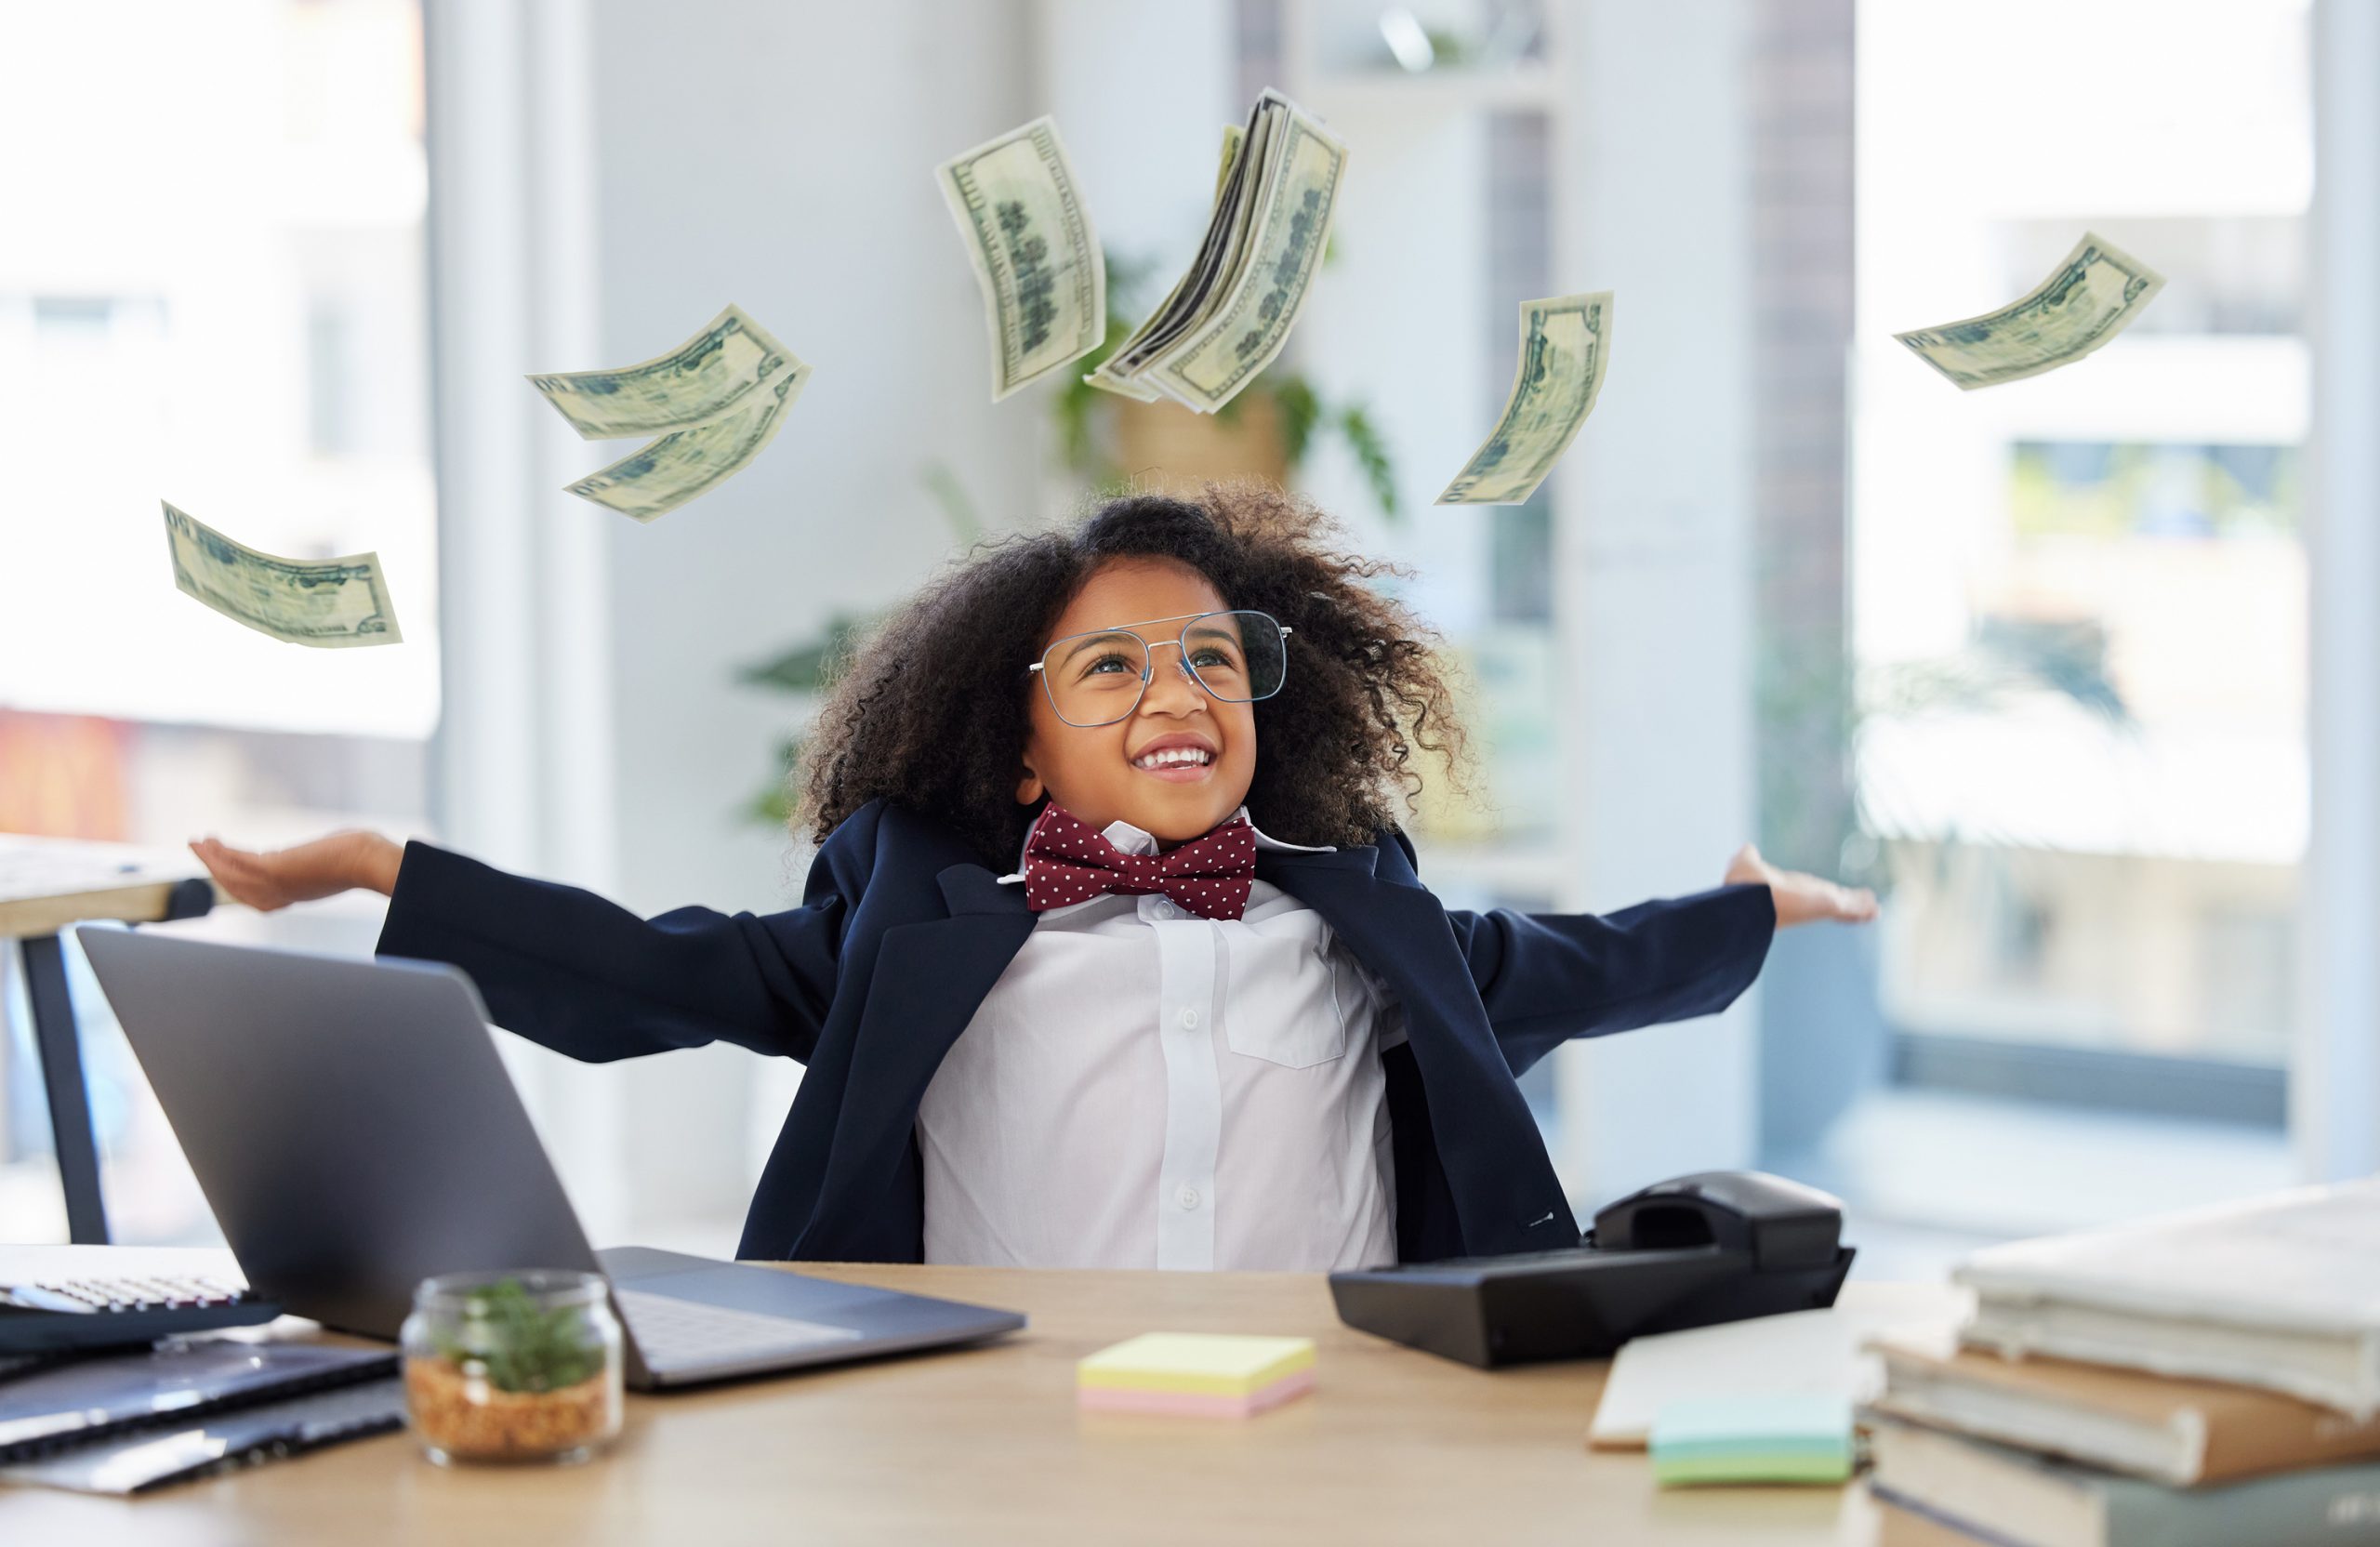 child in a suit throwing money into the air